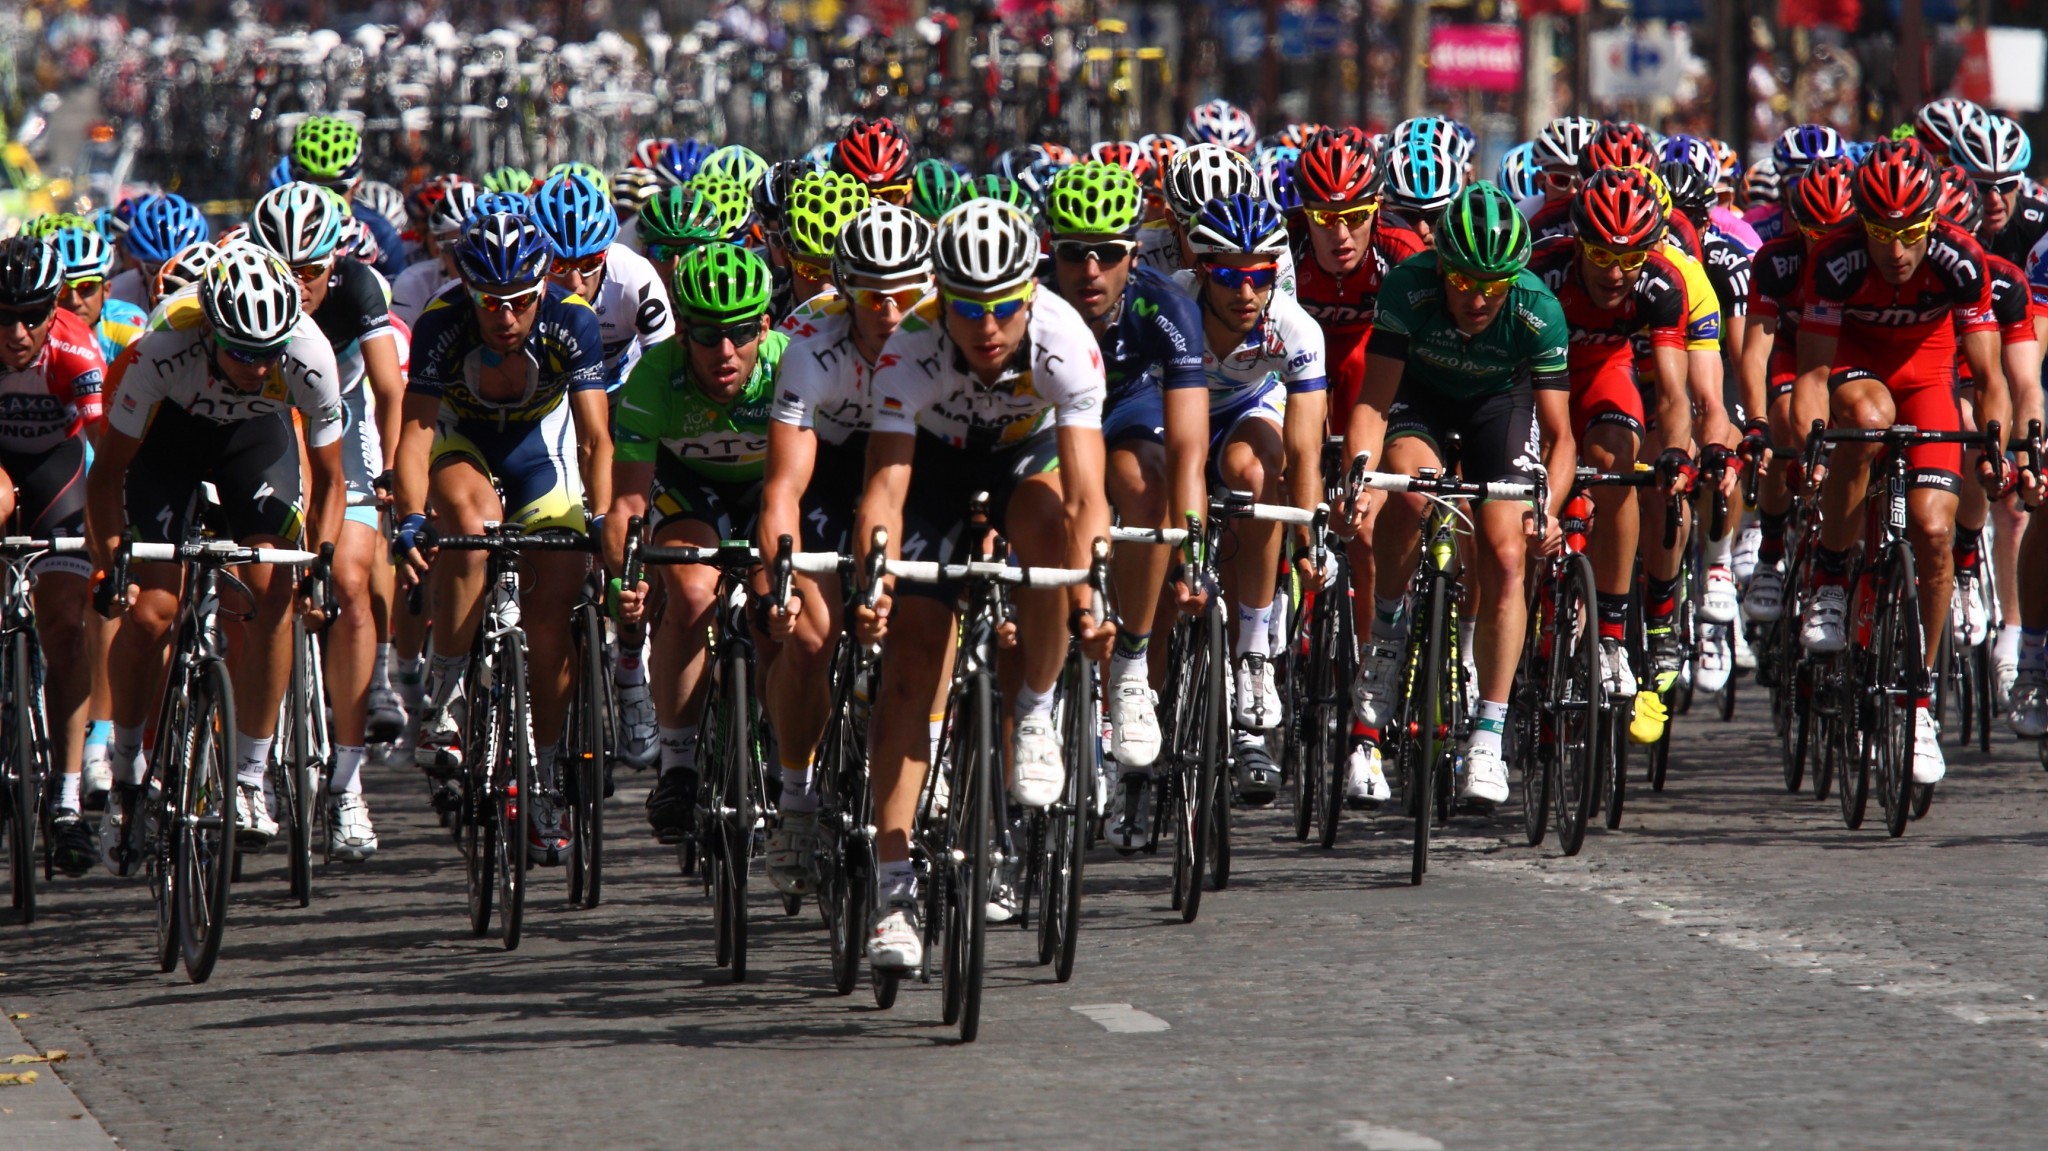 Reflected by the Tour de France female exclusion, the gender gap for female athletes relates to less media, consumer and commercial appeal.